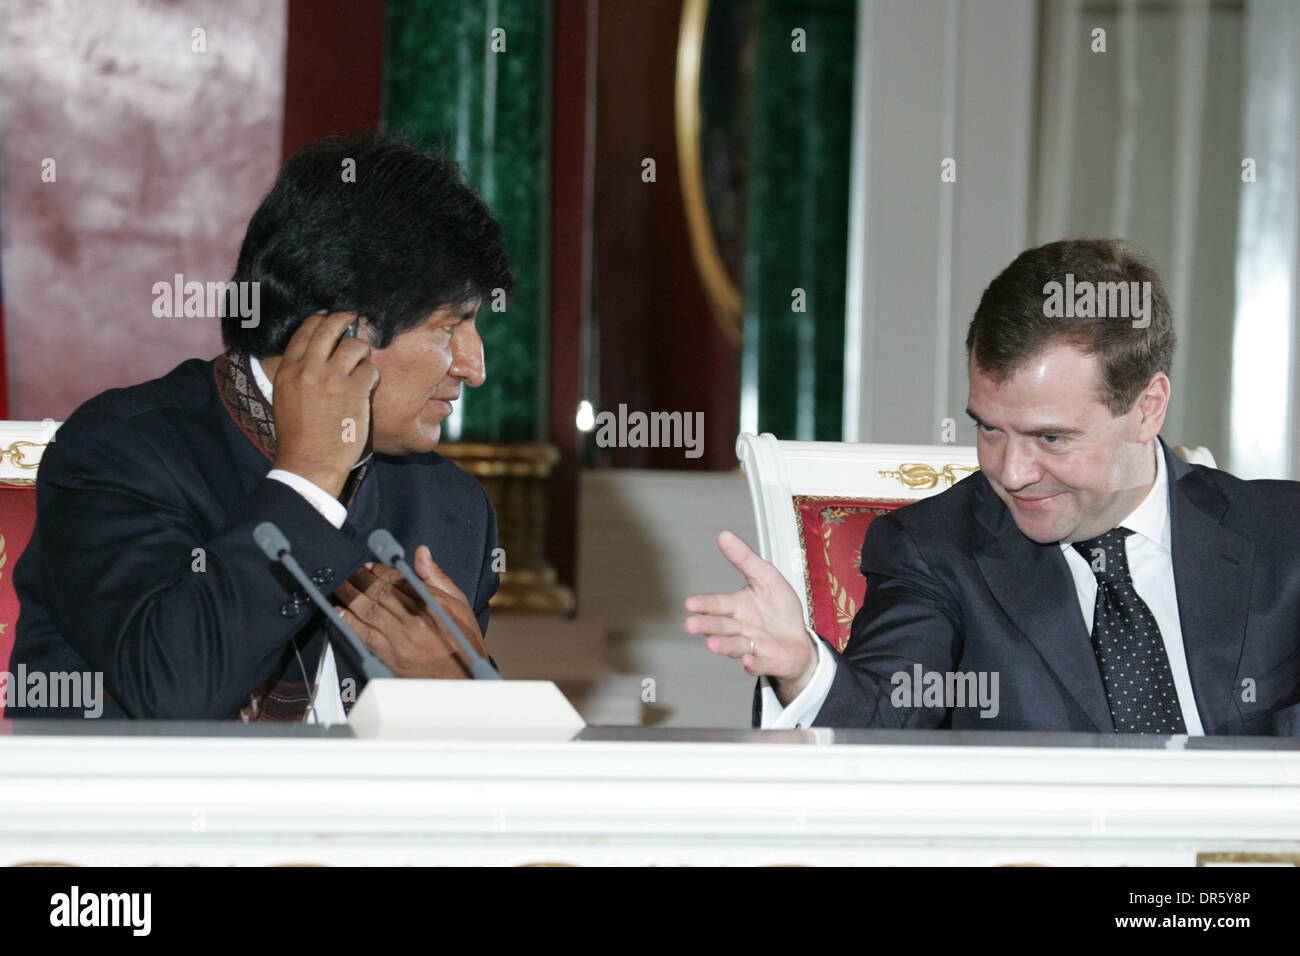 Feb 16, 2009 - Moscow, Russia - President of Bolivia Evo Morales visits Moscow. Pictured: President of Bolivia EVO MORALES (L) at the meeting with President of Russia DMITRY MEDVEDEV (R) in Kremlin. (Credit Image: © PhotoXpress/ZUMA Press) RESTRICTIONS: * North and South America Rights Only * Stock Photo